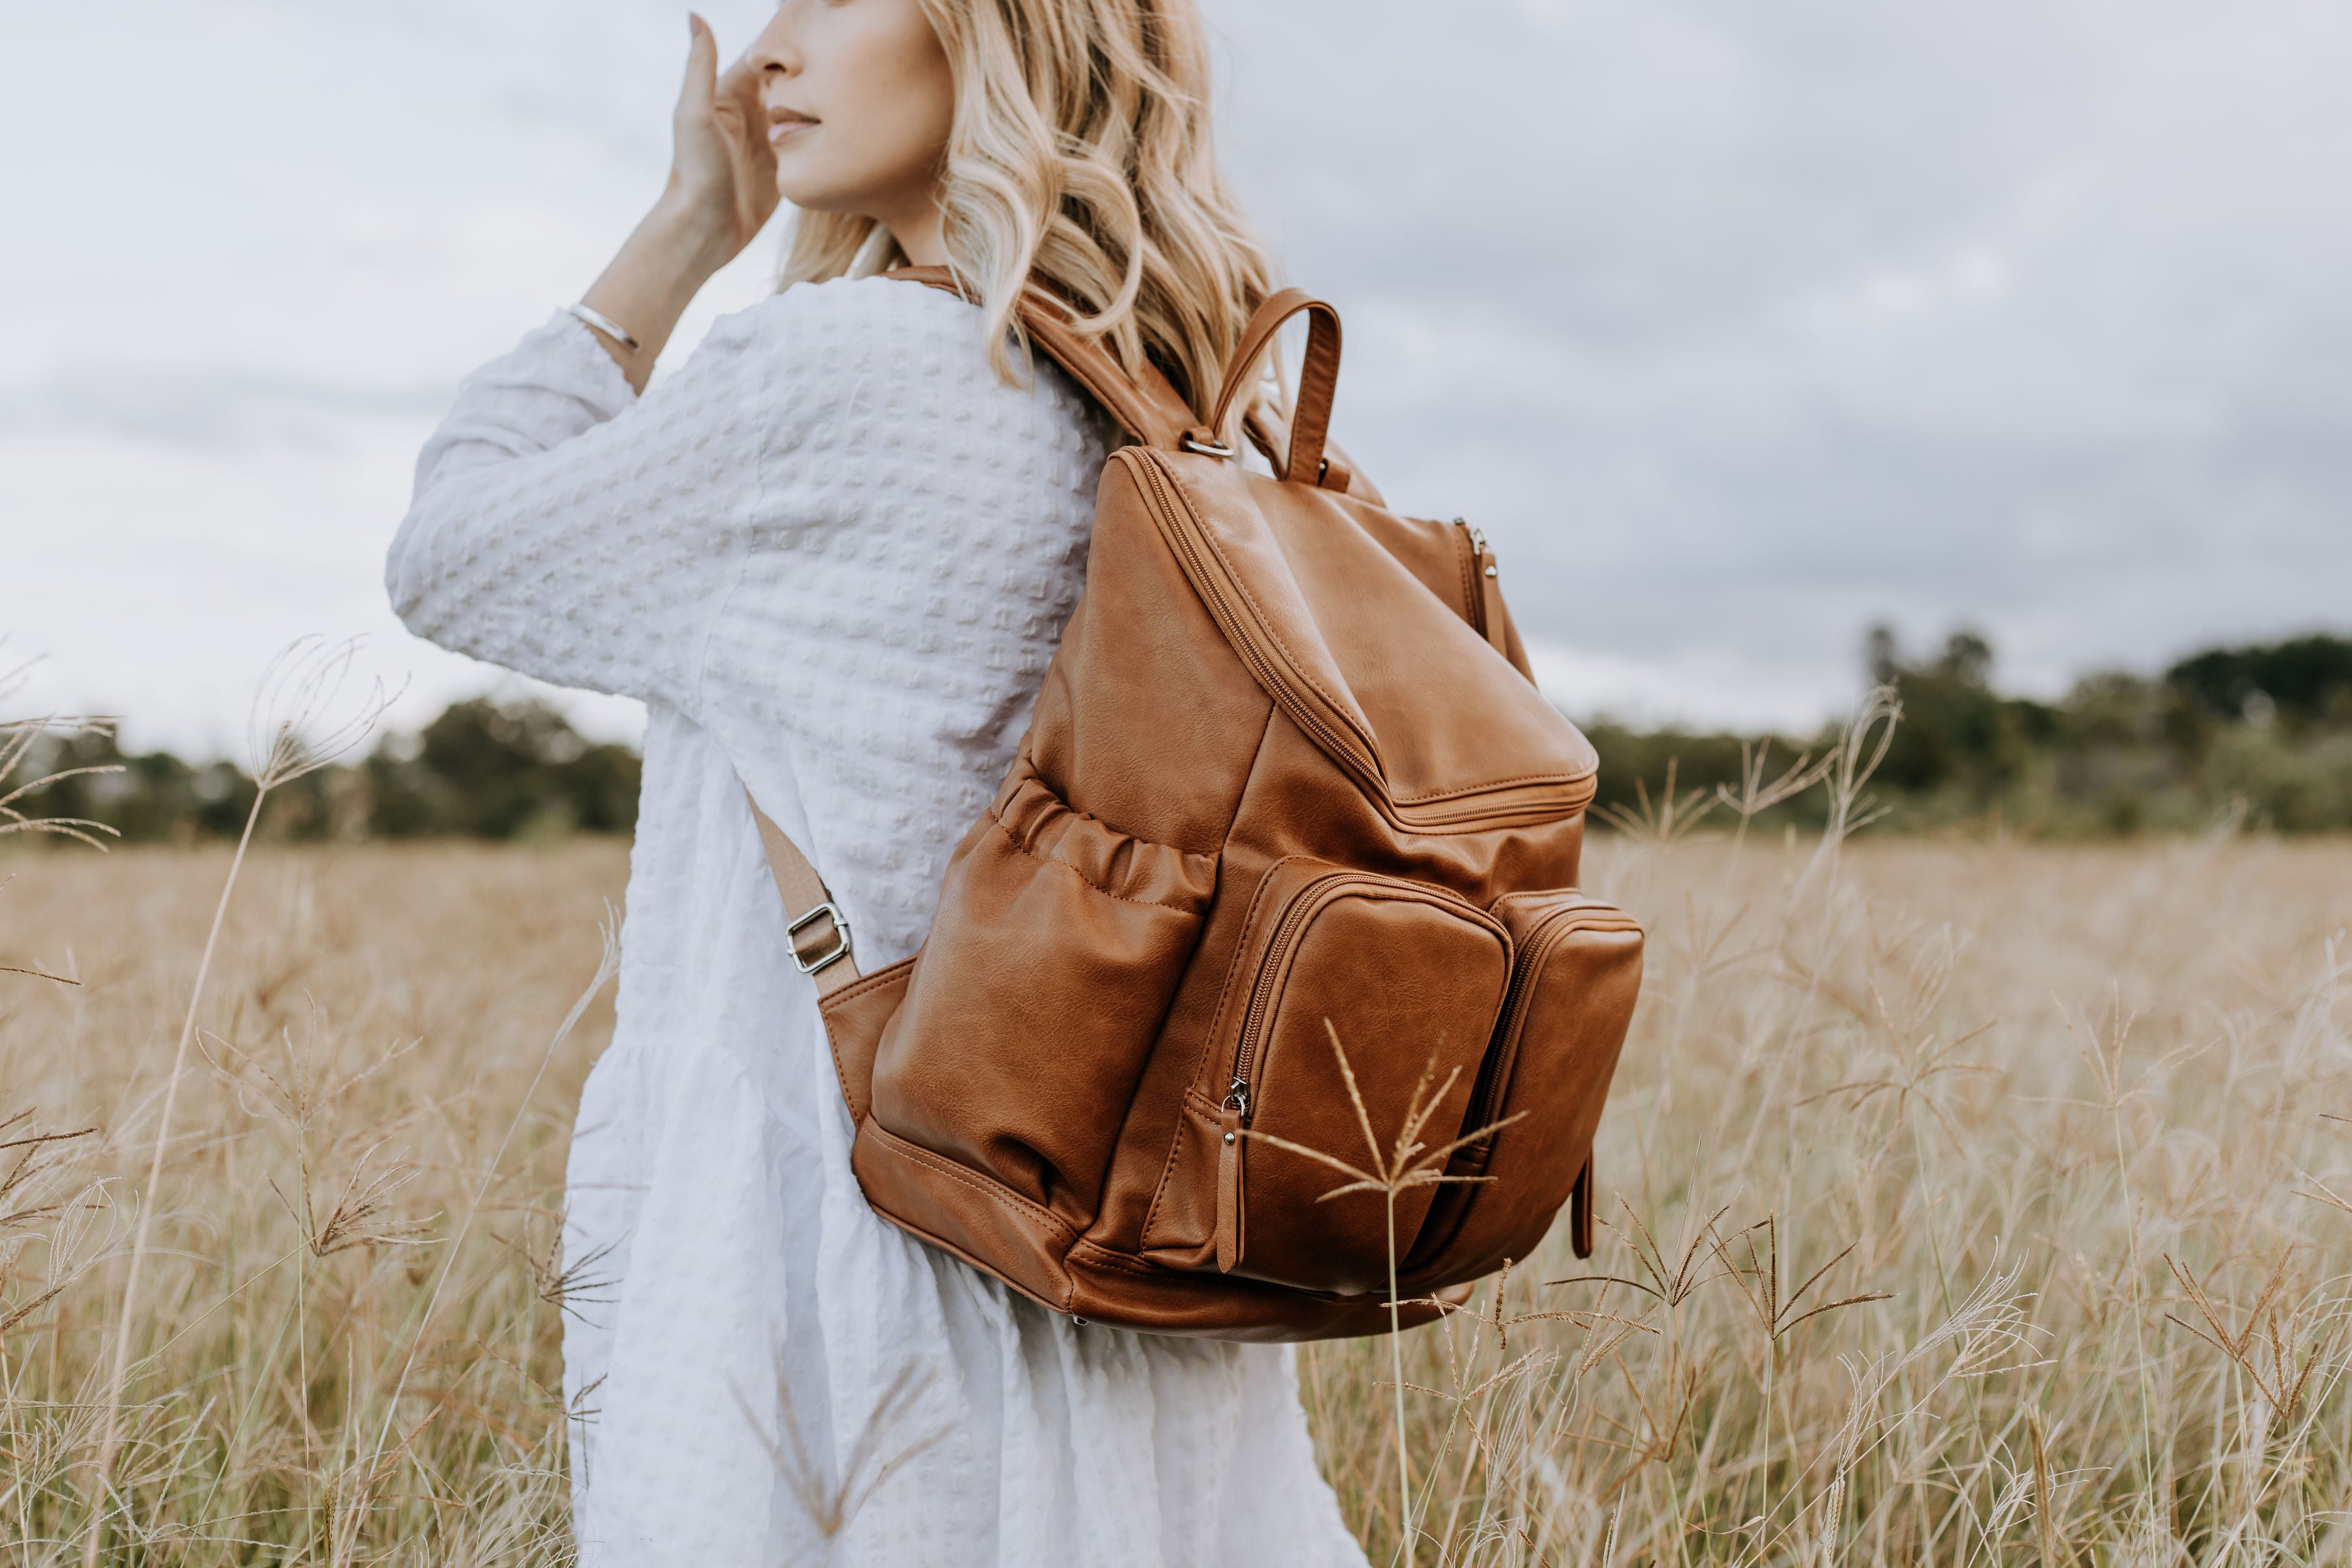 OiOi Vegan Leather Nappy Backpack Tan